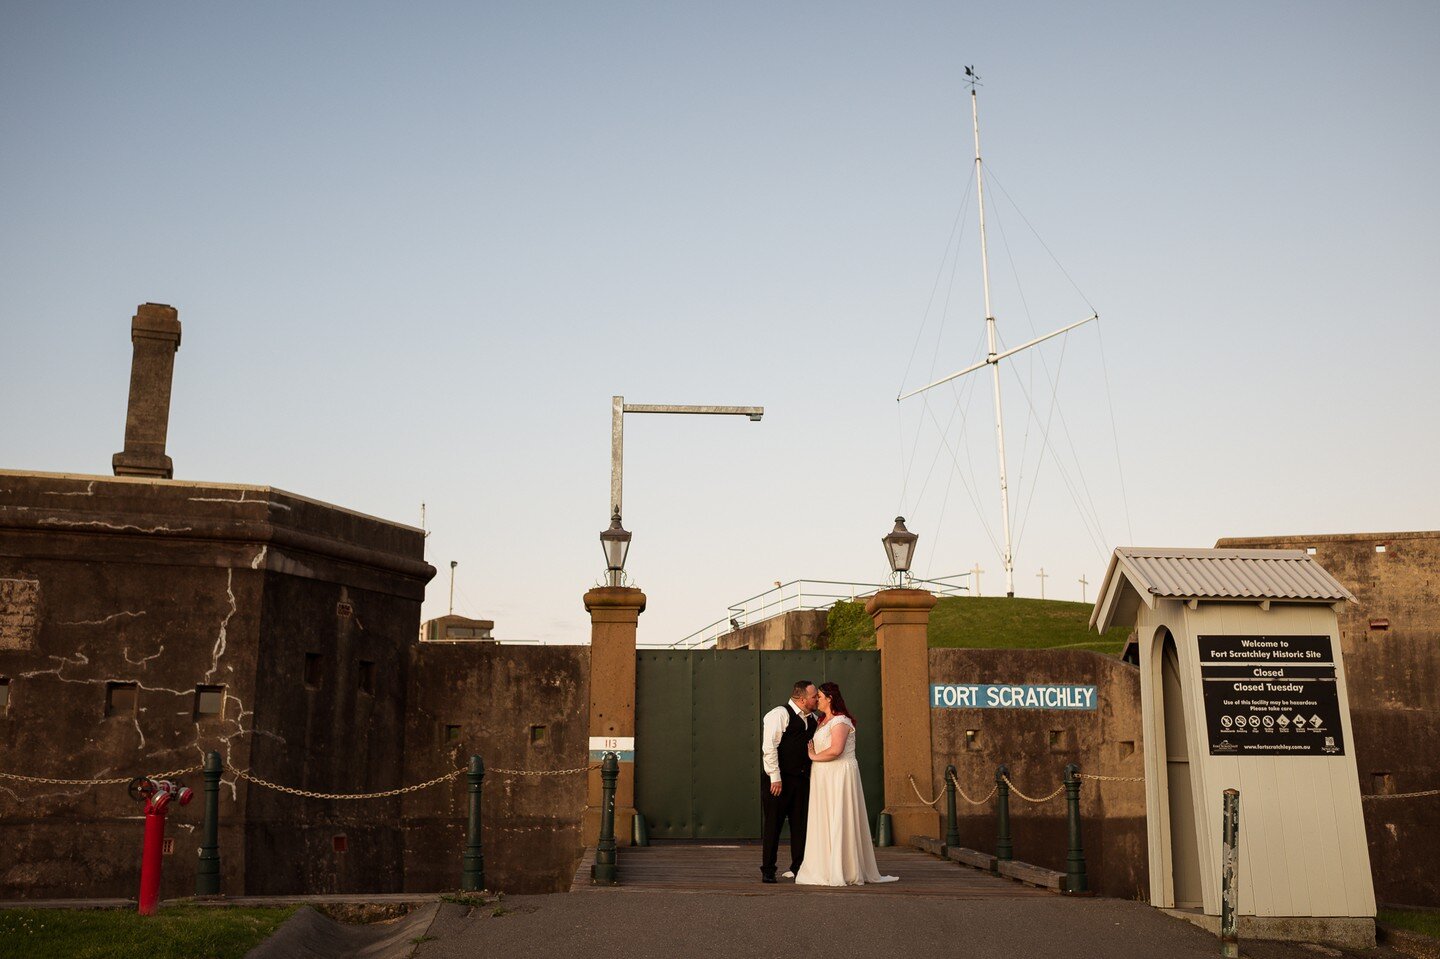 I am catching up on some of my blogs this week from recent weddings and the latest one to hit my website is Chloe &amp; Nathan's wedding from last year at Fort Scratchley in Newcastle. 

Link is in bio to check it out 😊

#newblog #newcastlewedding #